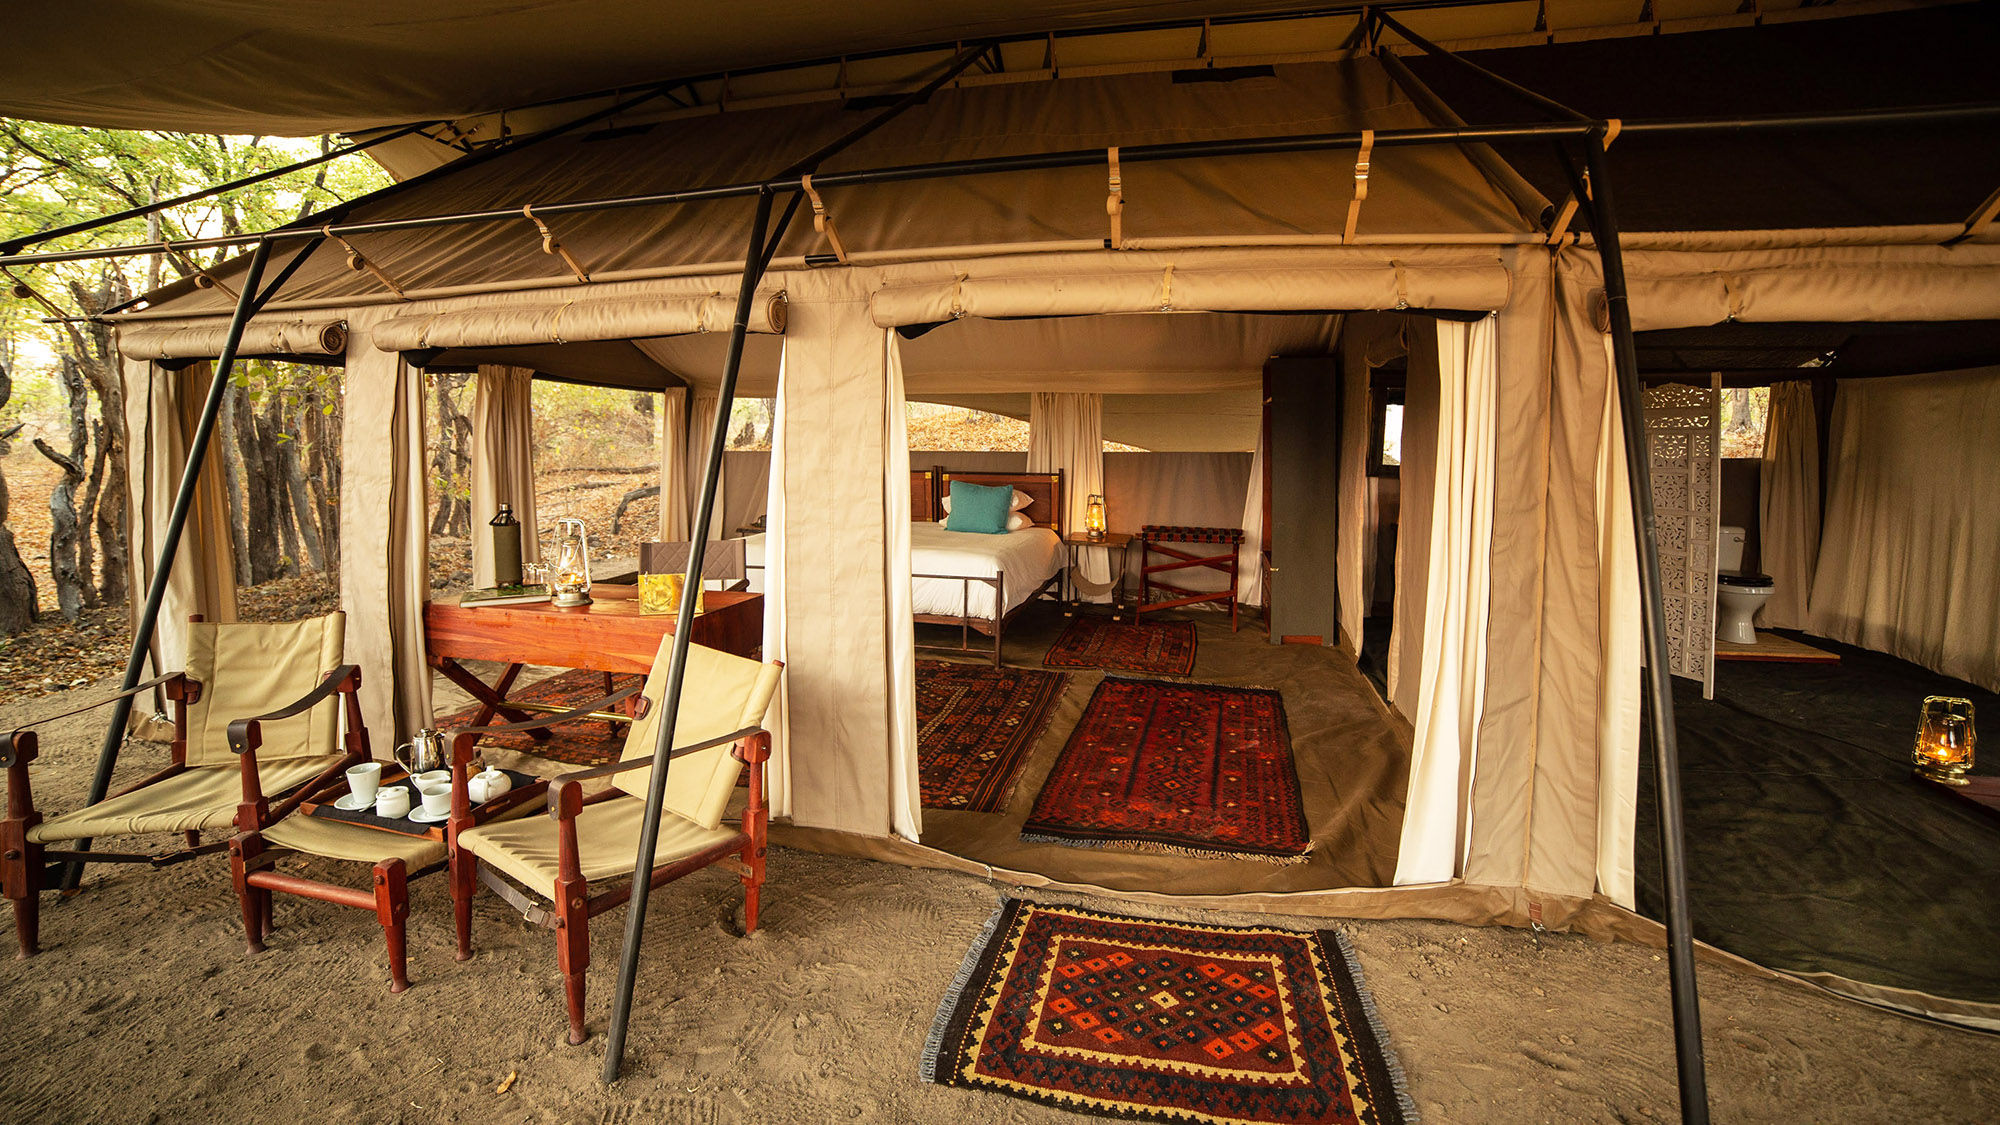 The Okavango Explorers Camp features tented accommodations in the Selinda Reserve in northern Botswana.